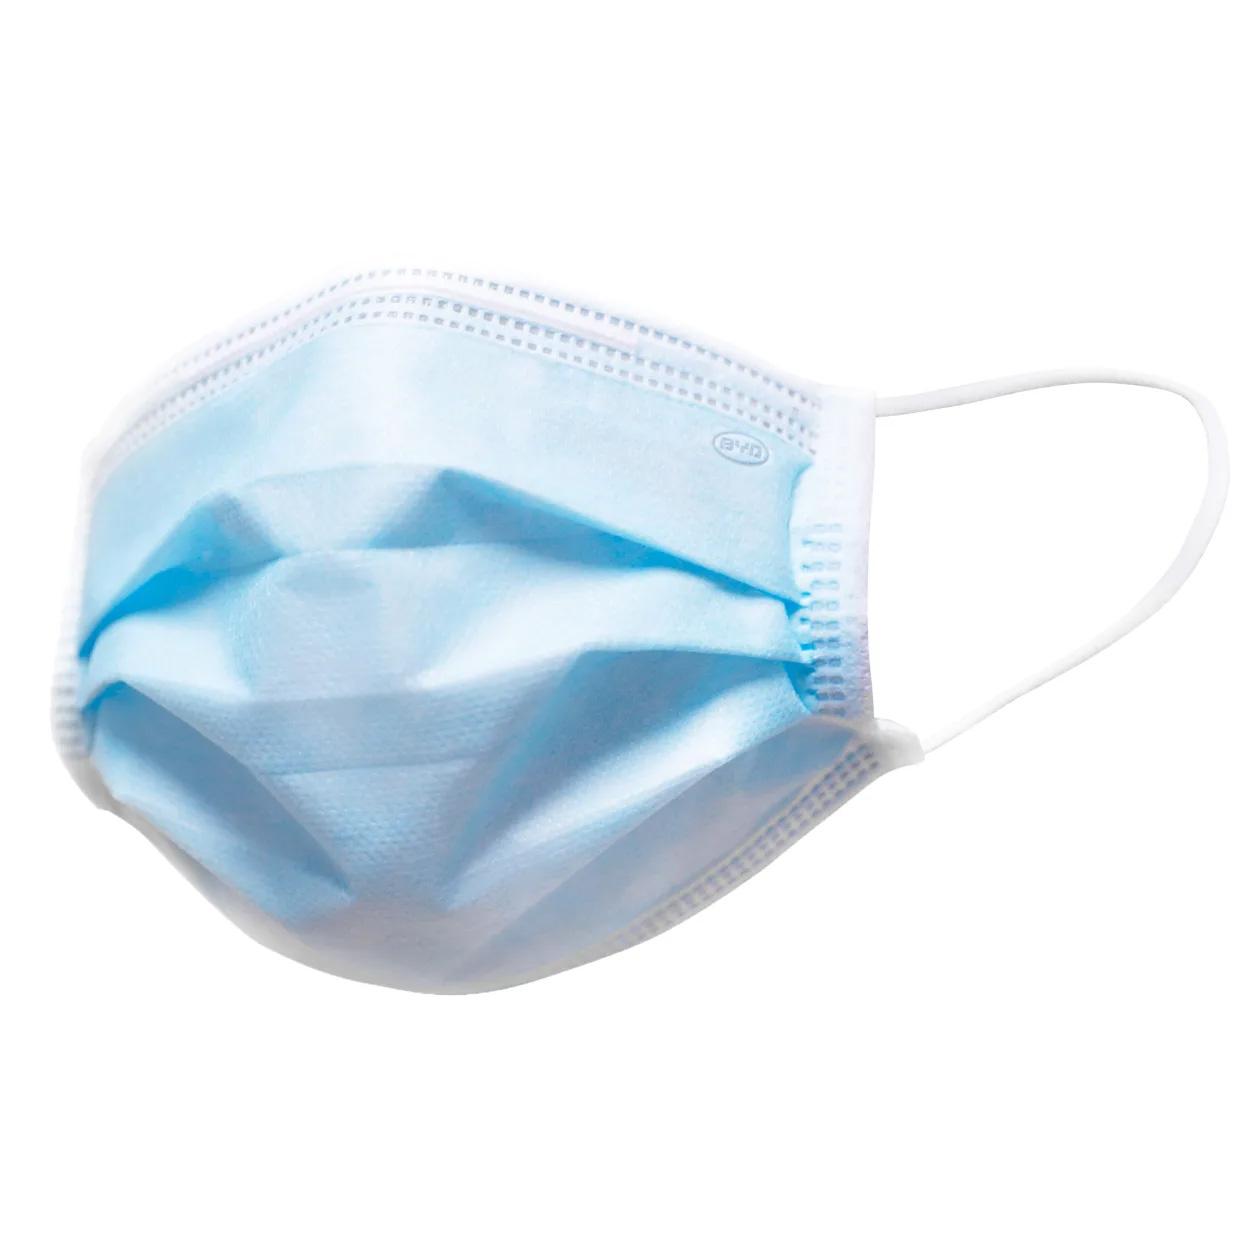 50 BYD Care 3-Ply Pleated Face Masks for $14.99 Shipped